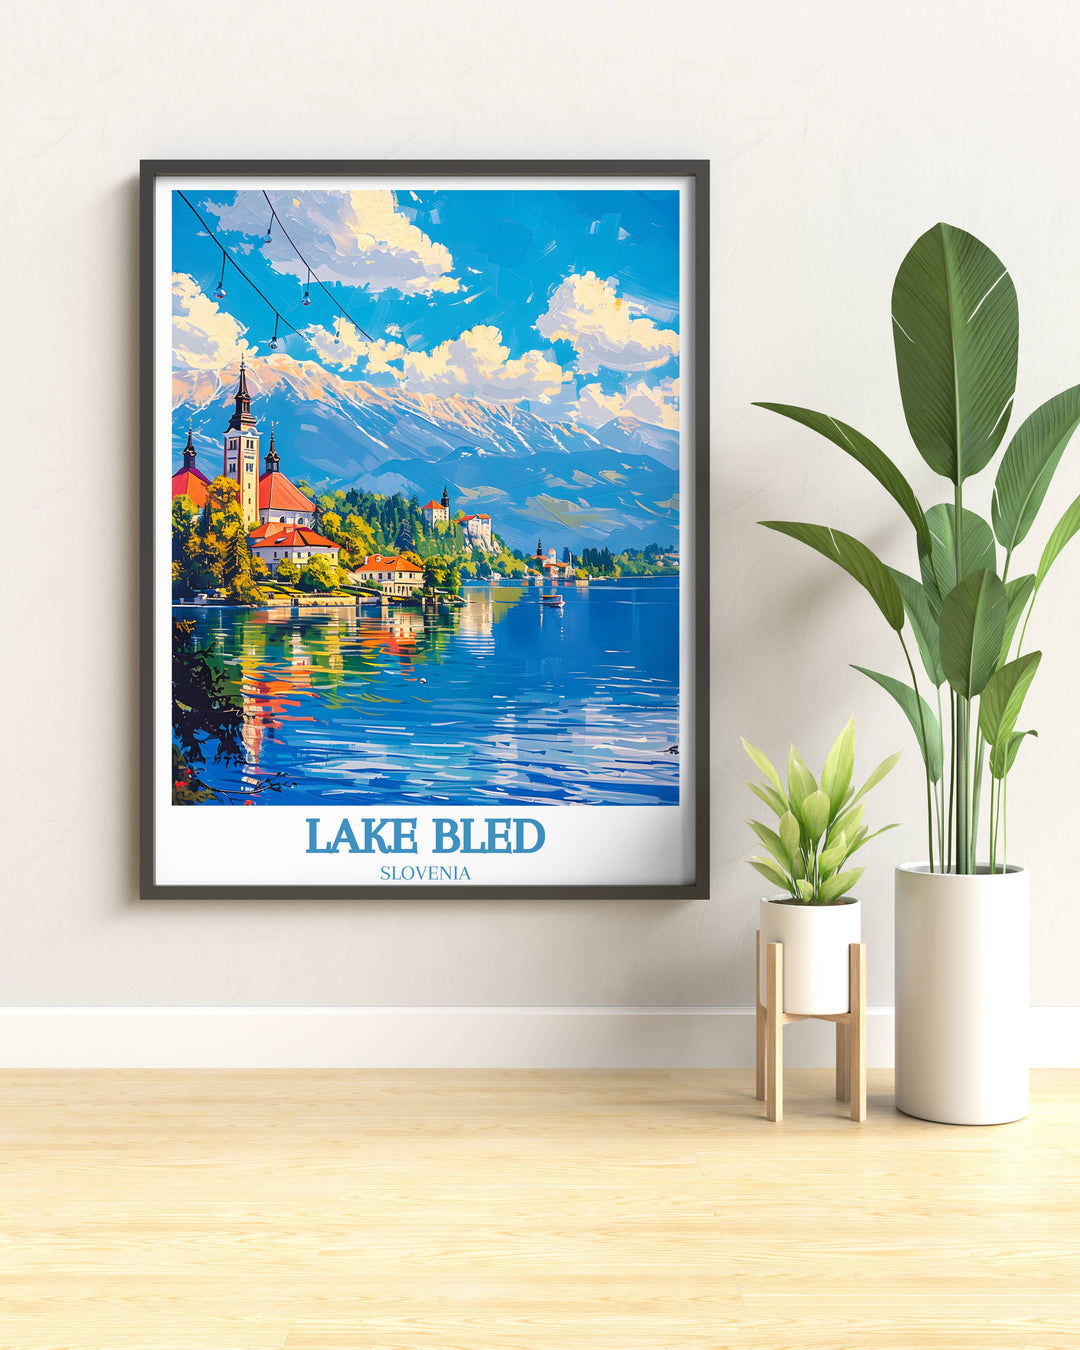 Panoramic Lake Bled Wall Print capturing the lush green landscape and peaceful lake ideal for tranquil home settings, offering a window to Slovenia's natural beauty that enhances relaxation and visual pleasure